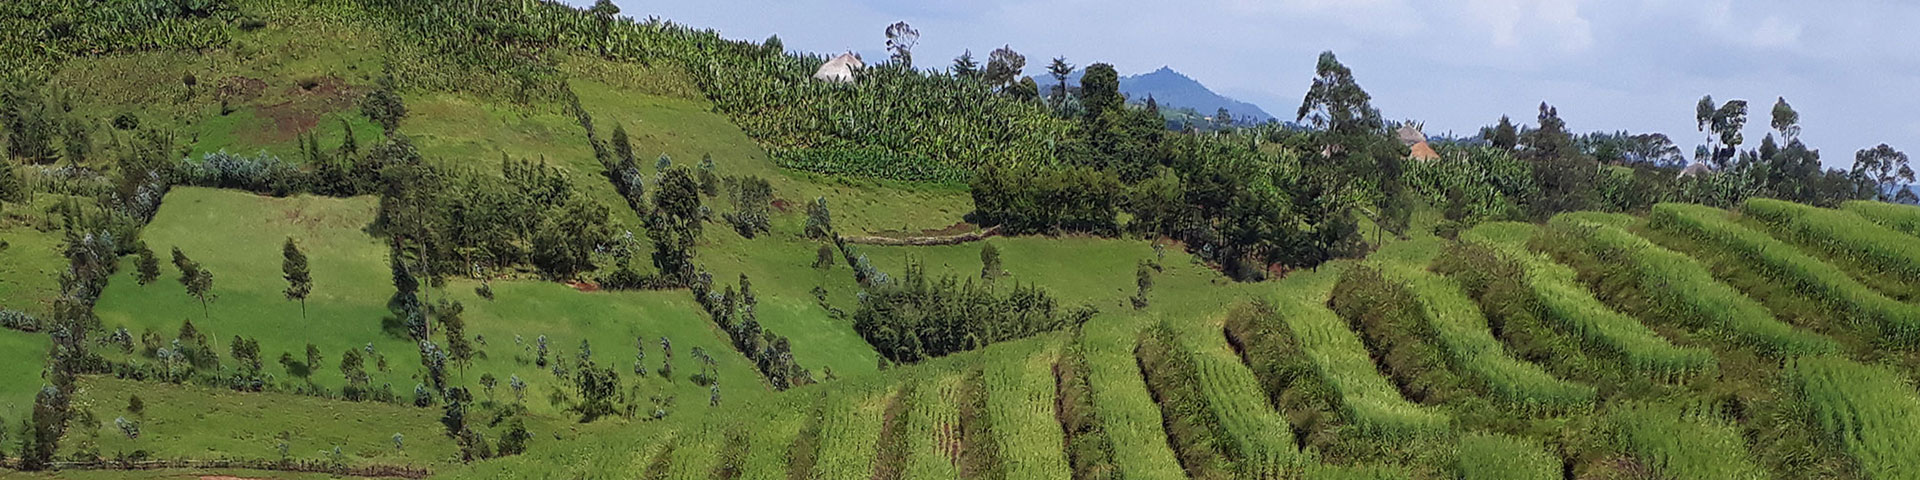 Green, agricultural field with trees in the background.